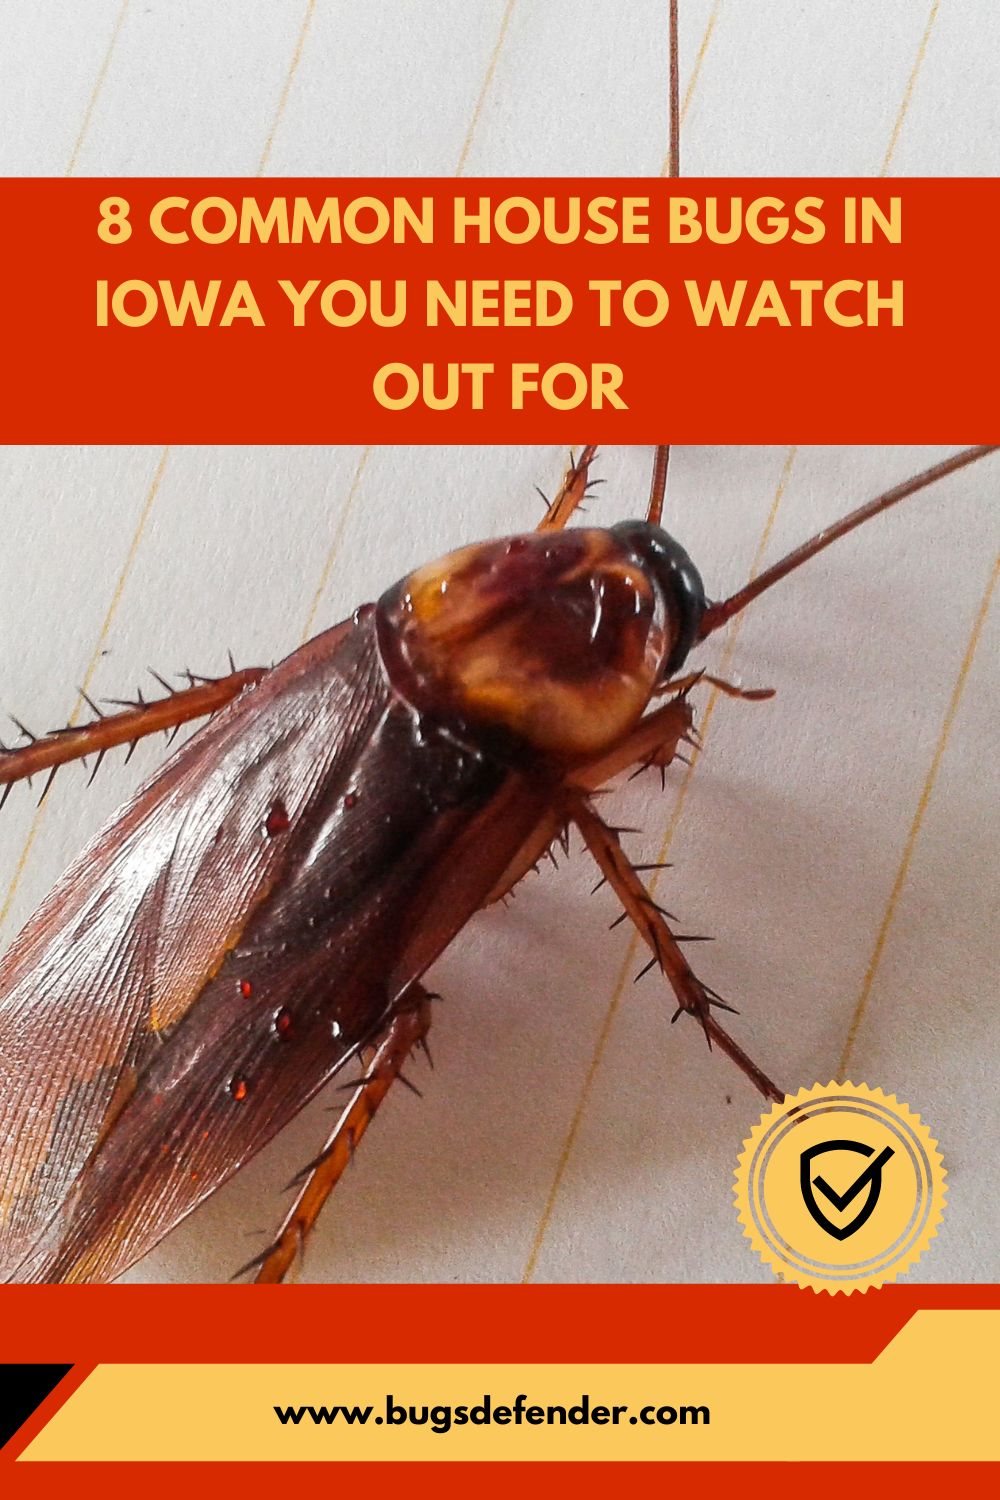 8 Common House Bugs In Iowa You Need To Watch Out For pin1